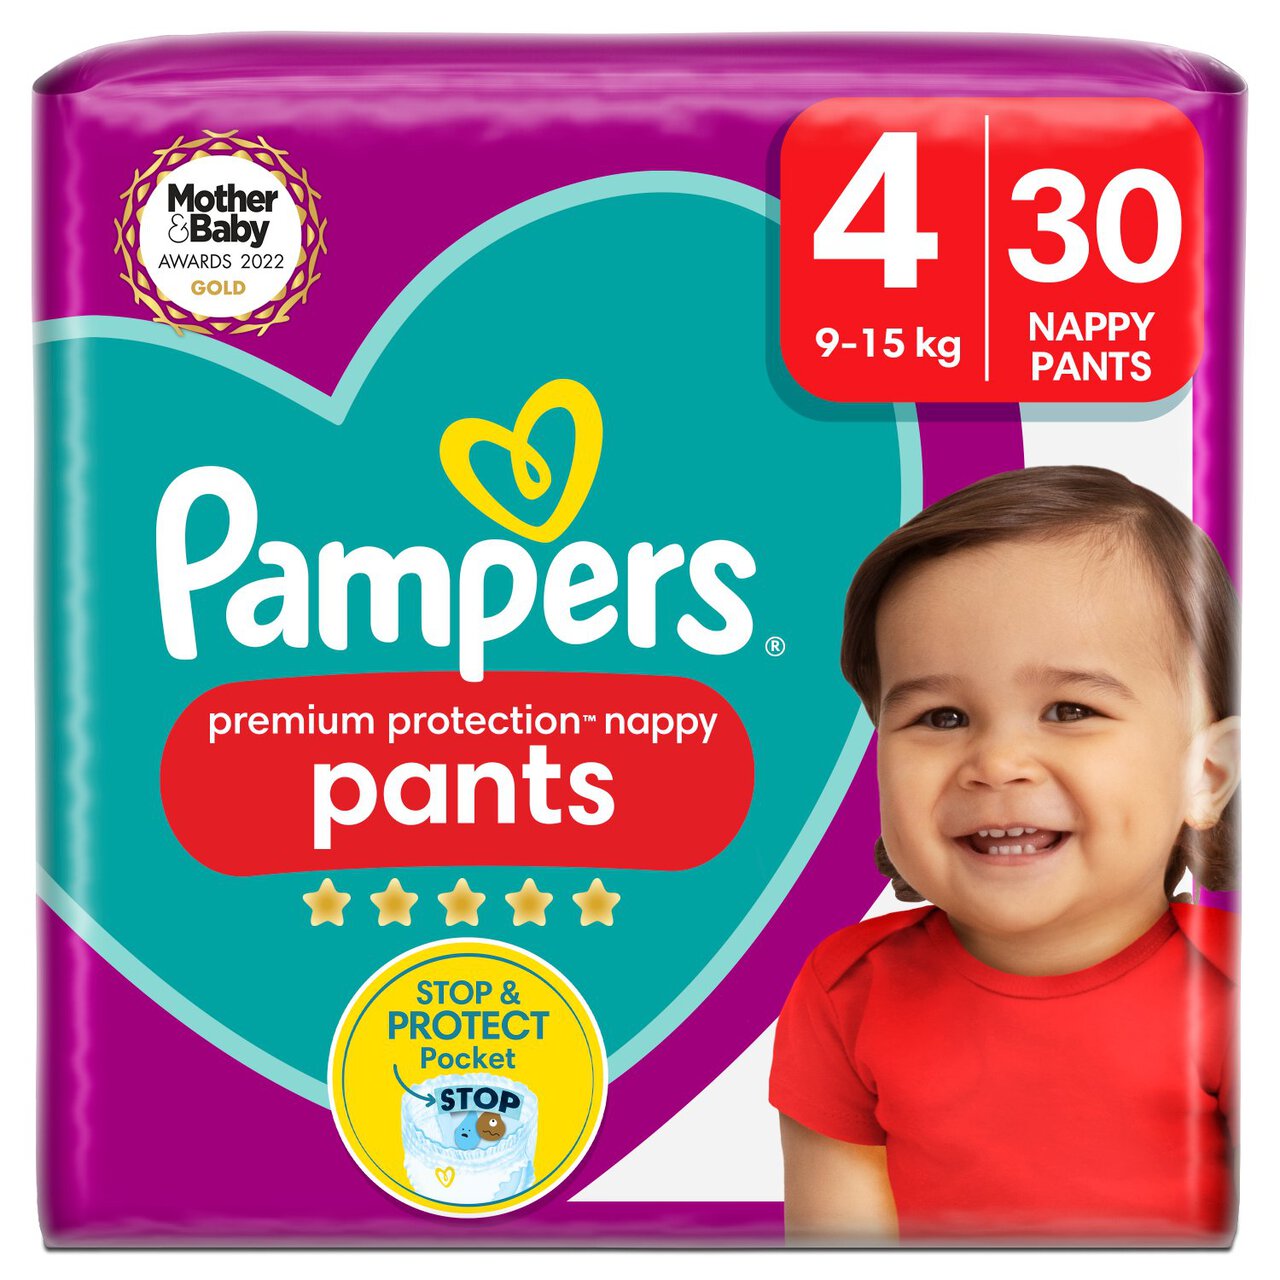 pampers protection active fit 4